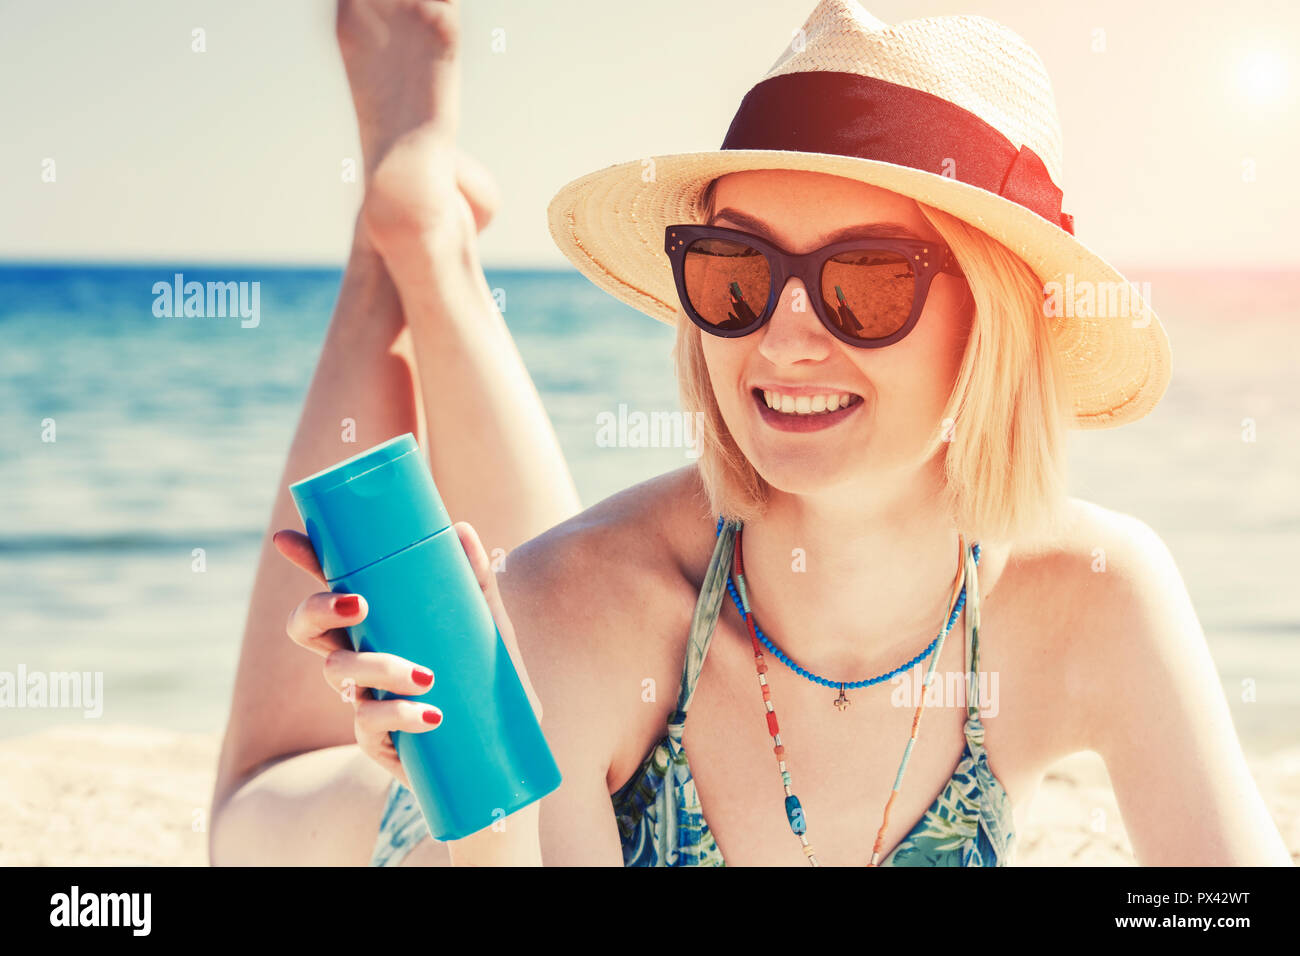 beautiful young woman holding a sun cream bottle on the beach Stock Photo